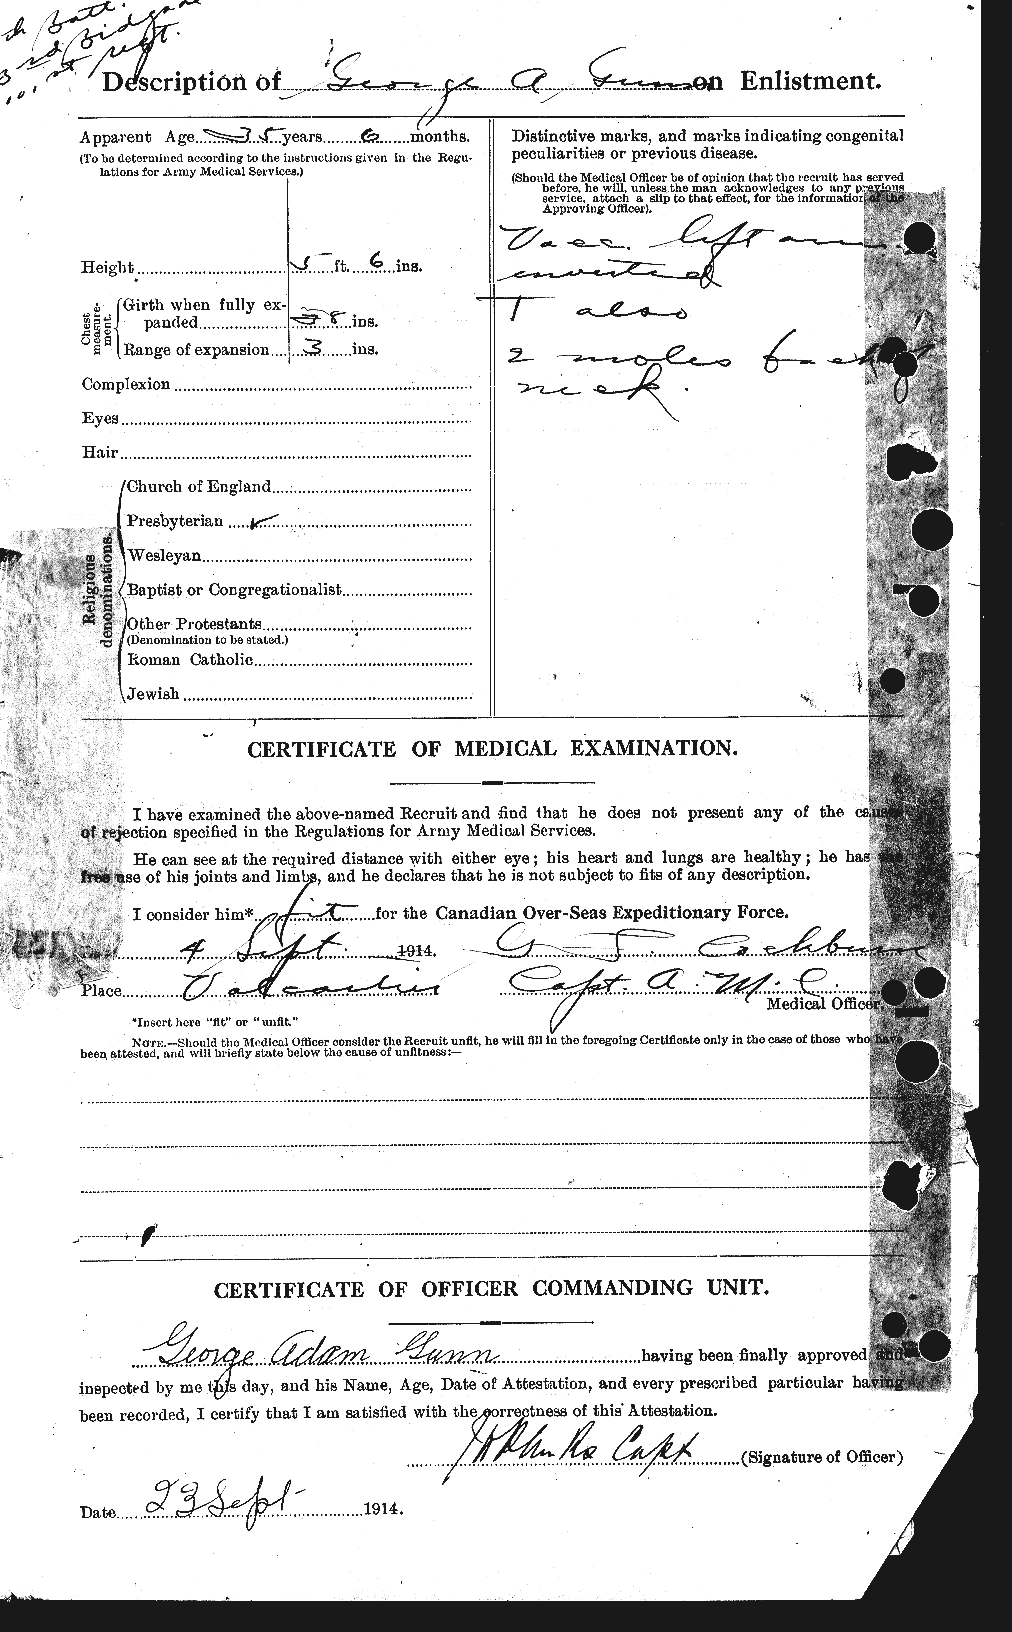 Personnel Records of the First World War - CEF 369238b